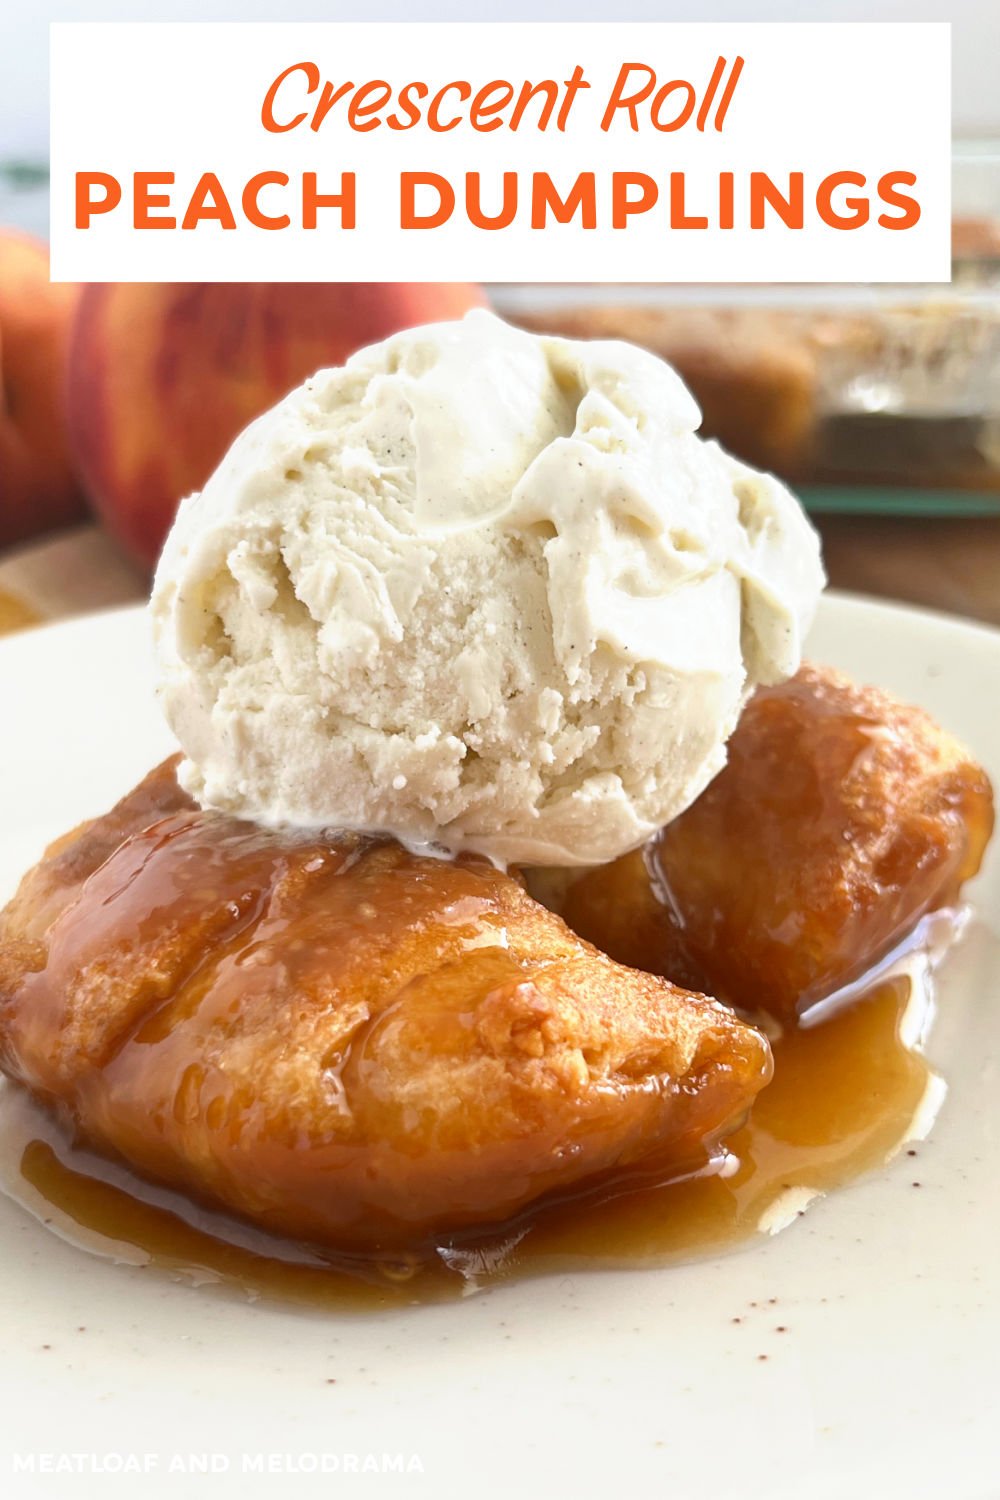 Crescent Roll Peach Dumplings is an easy dessert recipe with fresh peaches, Sprite and crescent rolls baked in a delicious caramel sauce. An easy summer dessert perfect for peach season! via @meamel